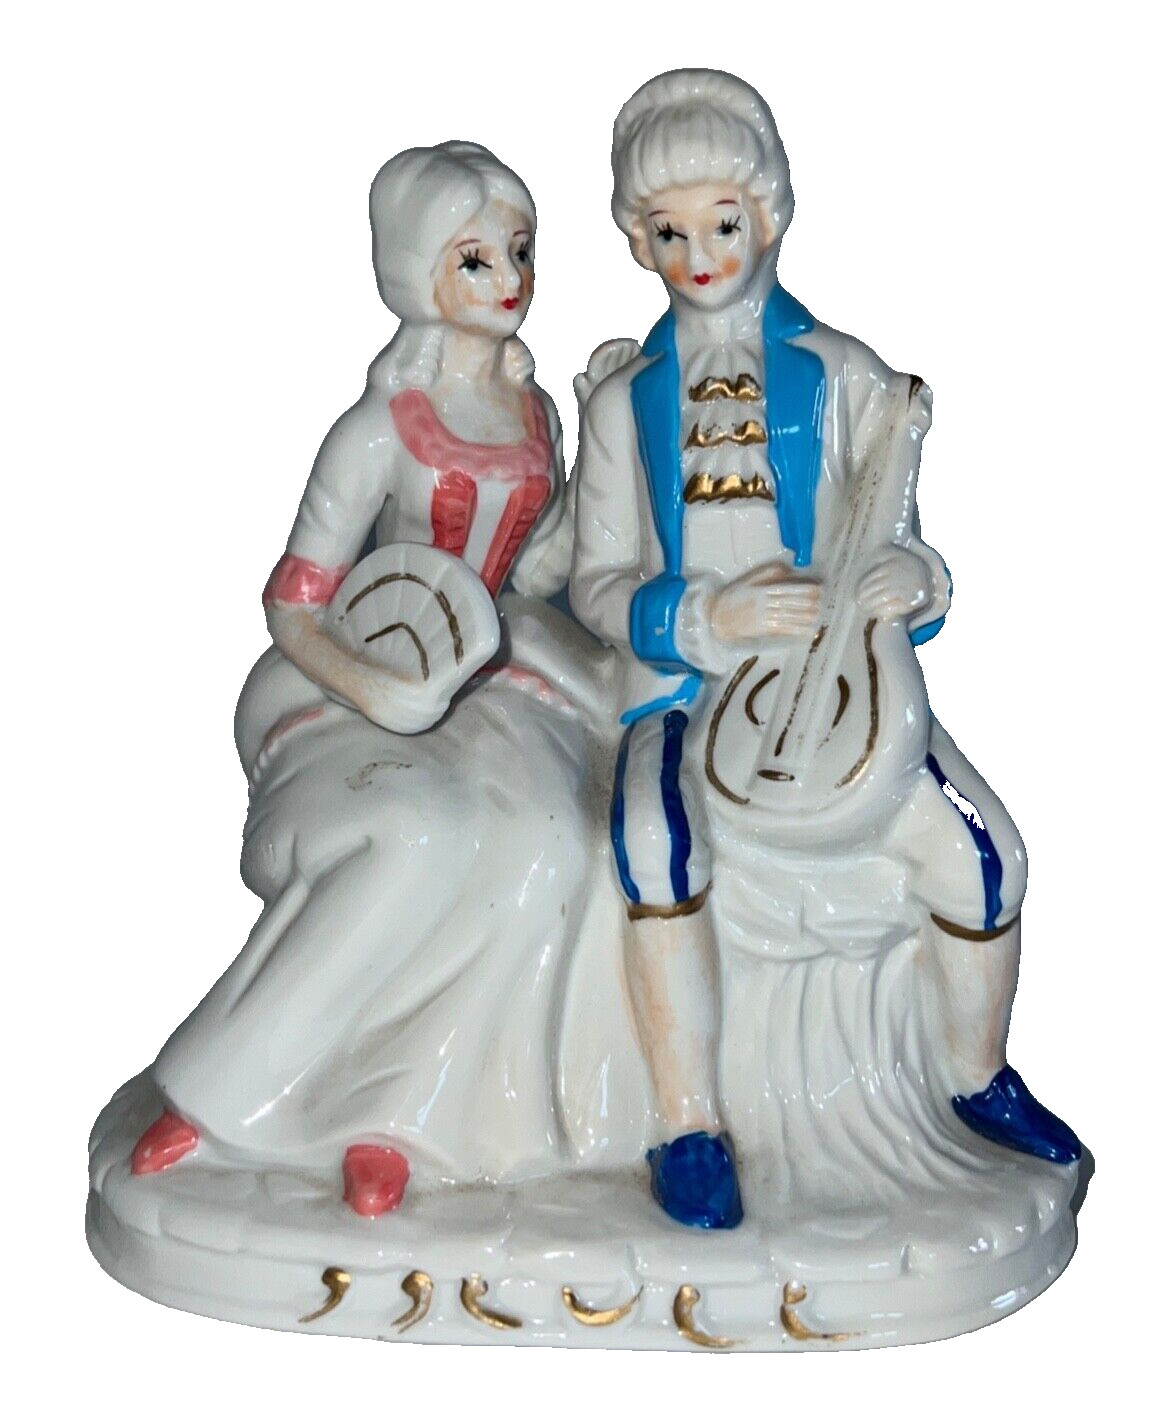 Porcelain COLONIAL COUPLE MAN/LADY Listening to Music Figurine  by SOPHIA ANN